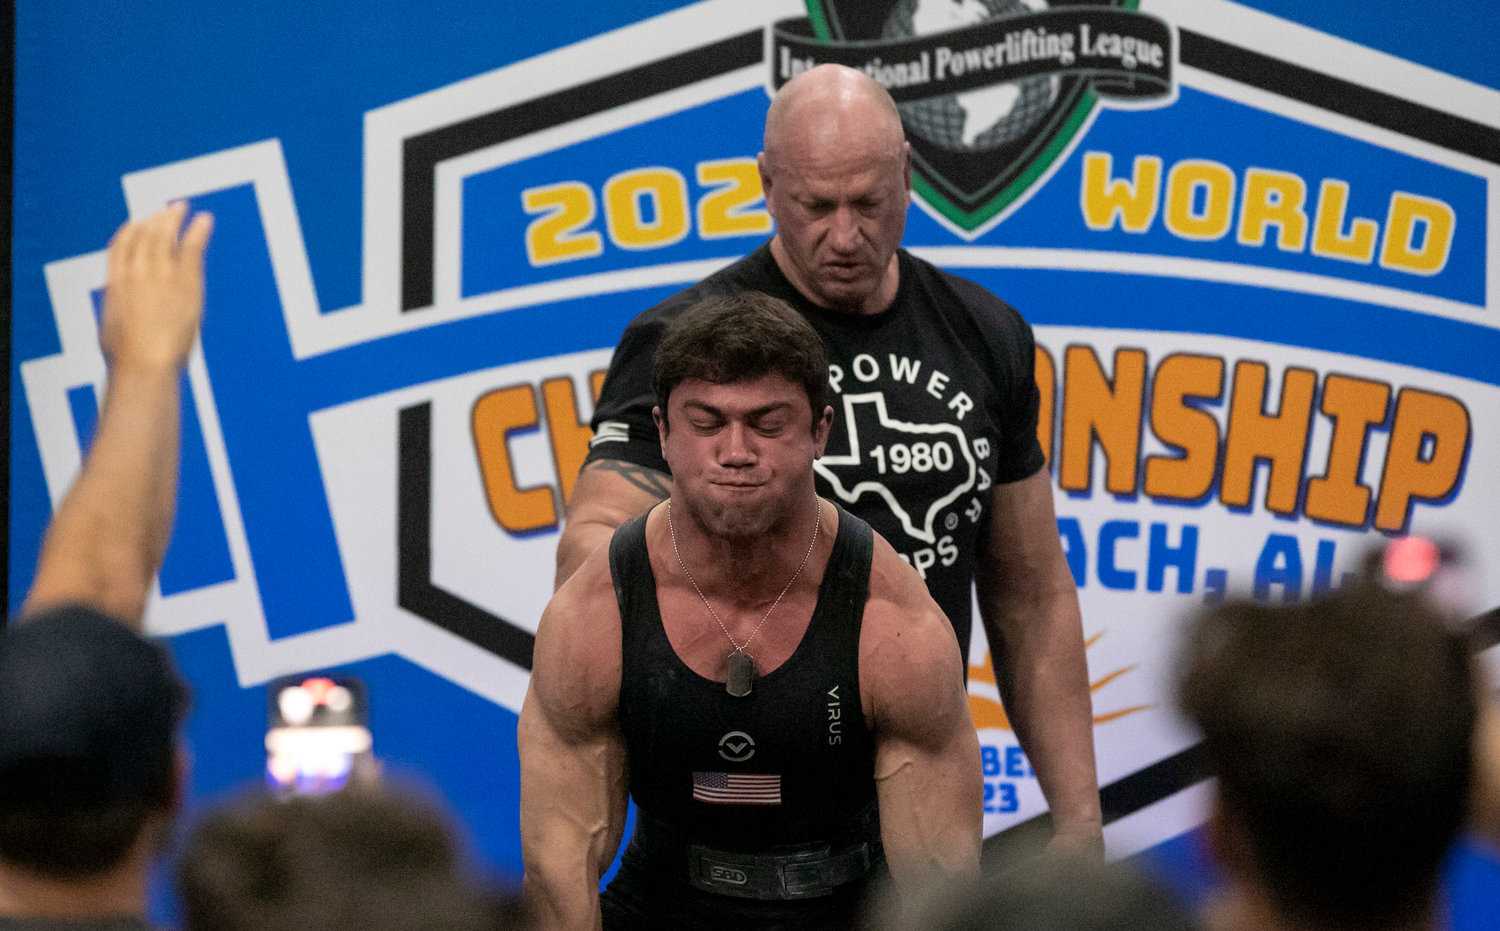 19-year-old Mcvay Stockwell pulls a world record-setting deadlift of 661.4 pounds (300 kg) on the first day of competition in the IPL’s World Championship meet at the Orange Beach Event Center Oct. 20. Originally slated to be held in Russia, the event was moved to the Alabama Gulf Coast on short notice to mark one of the top sports stories in Baldwin County this year.